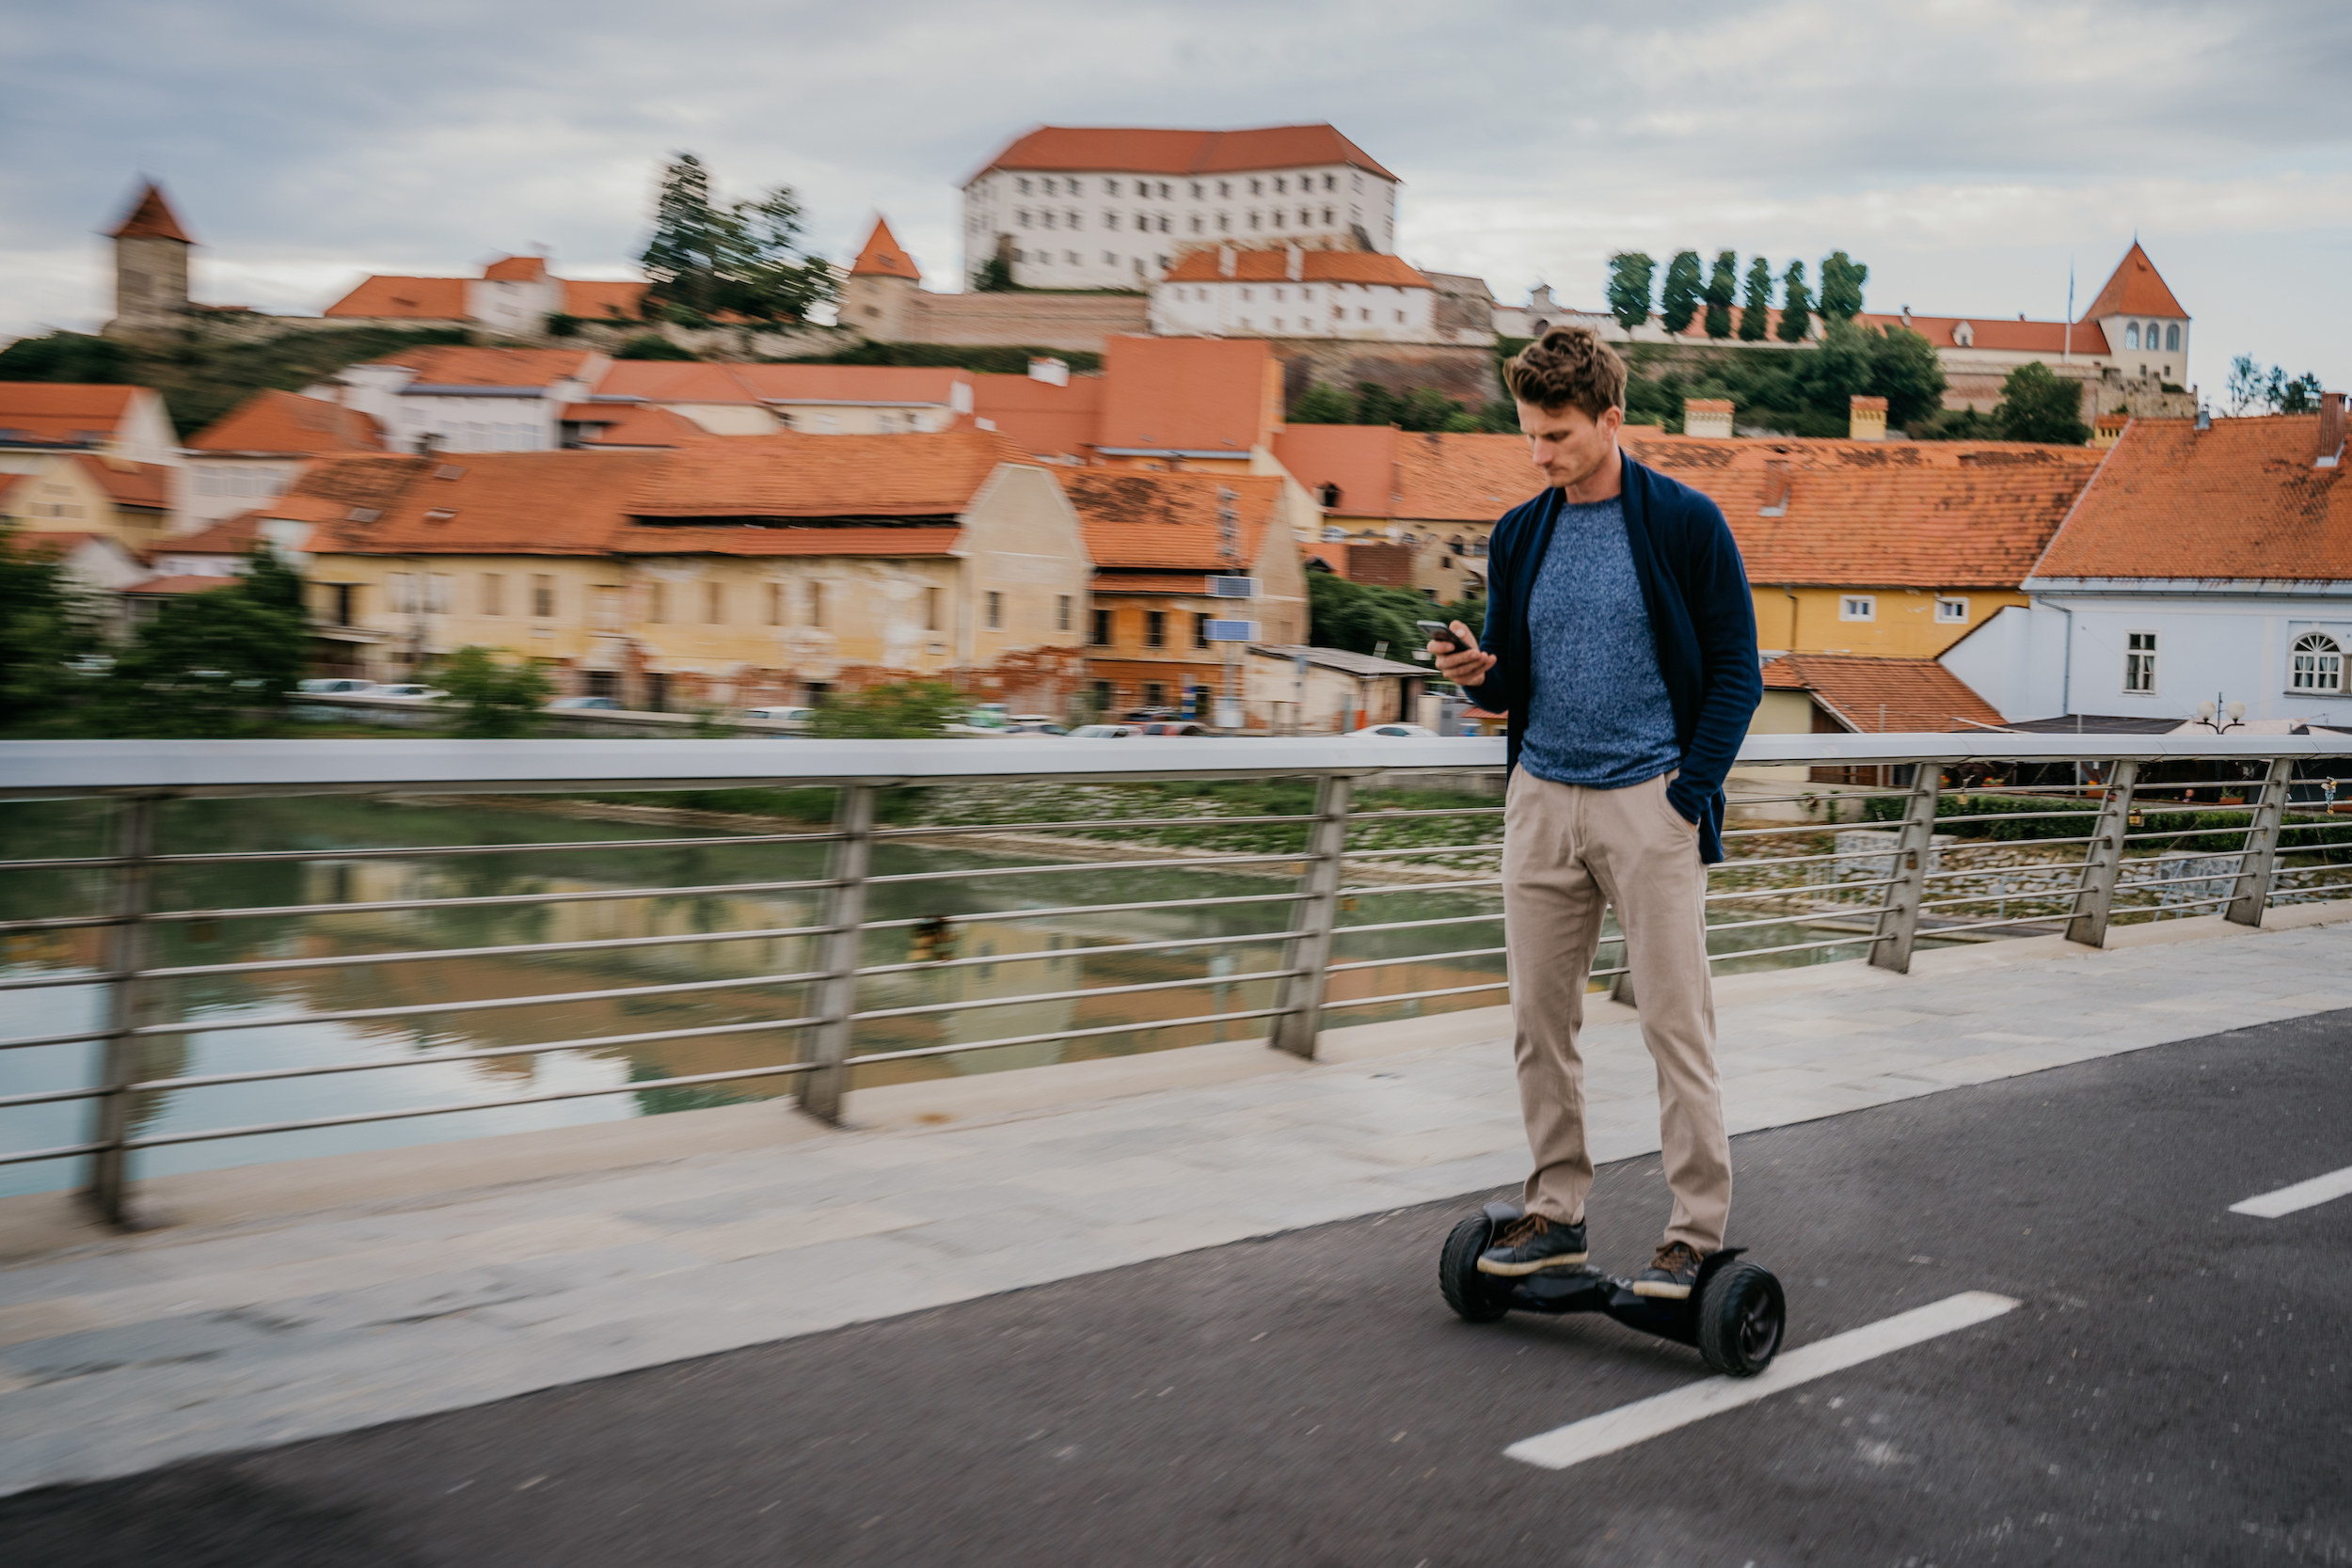 A man on his phone while riding a hoverboard